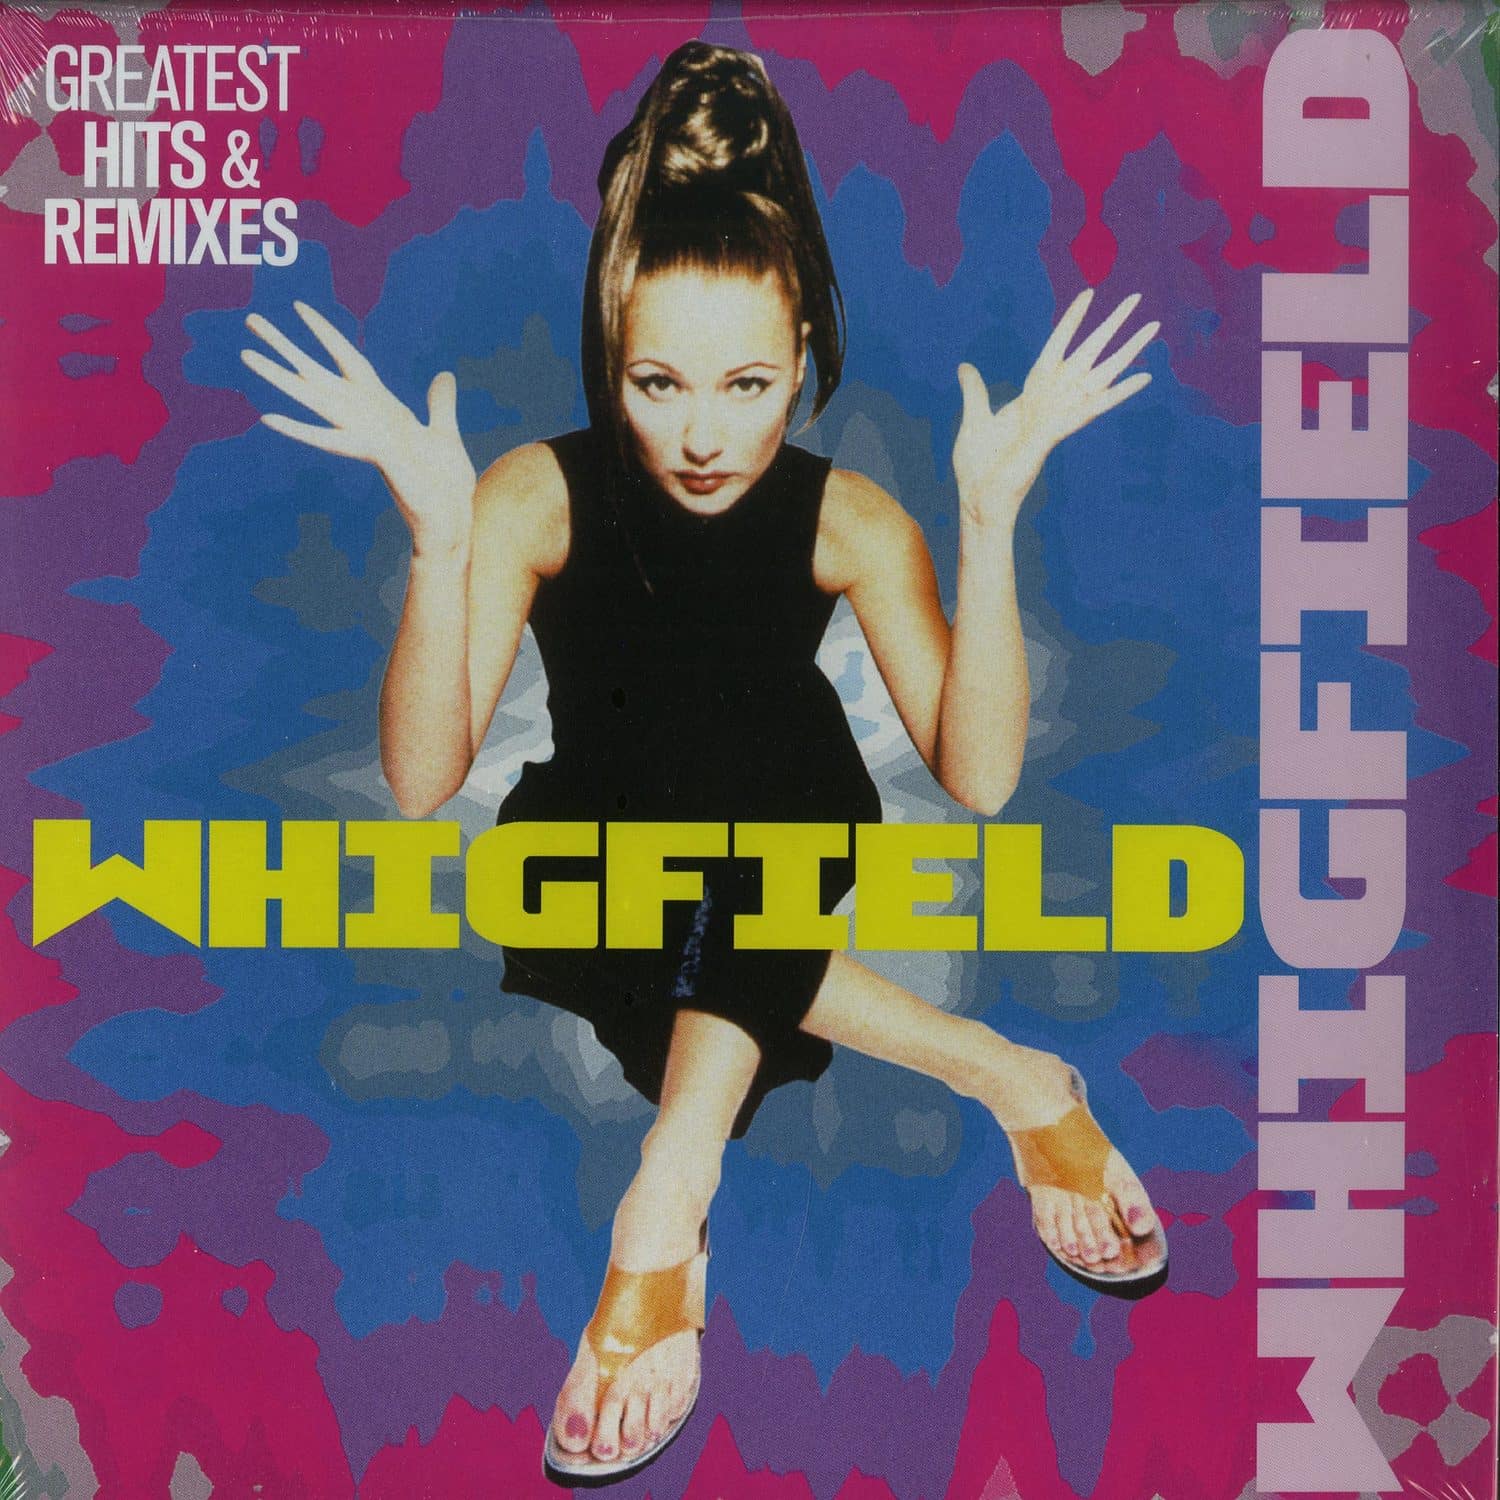 Whigfield - GREATEST HITS & REMIXES 